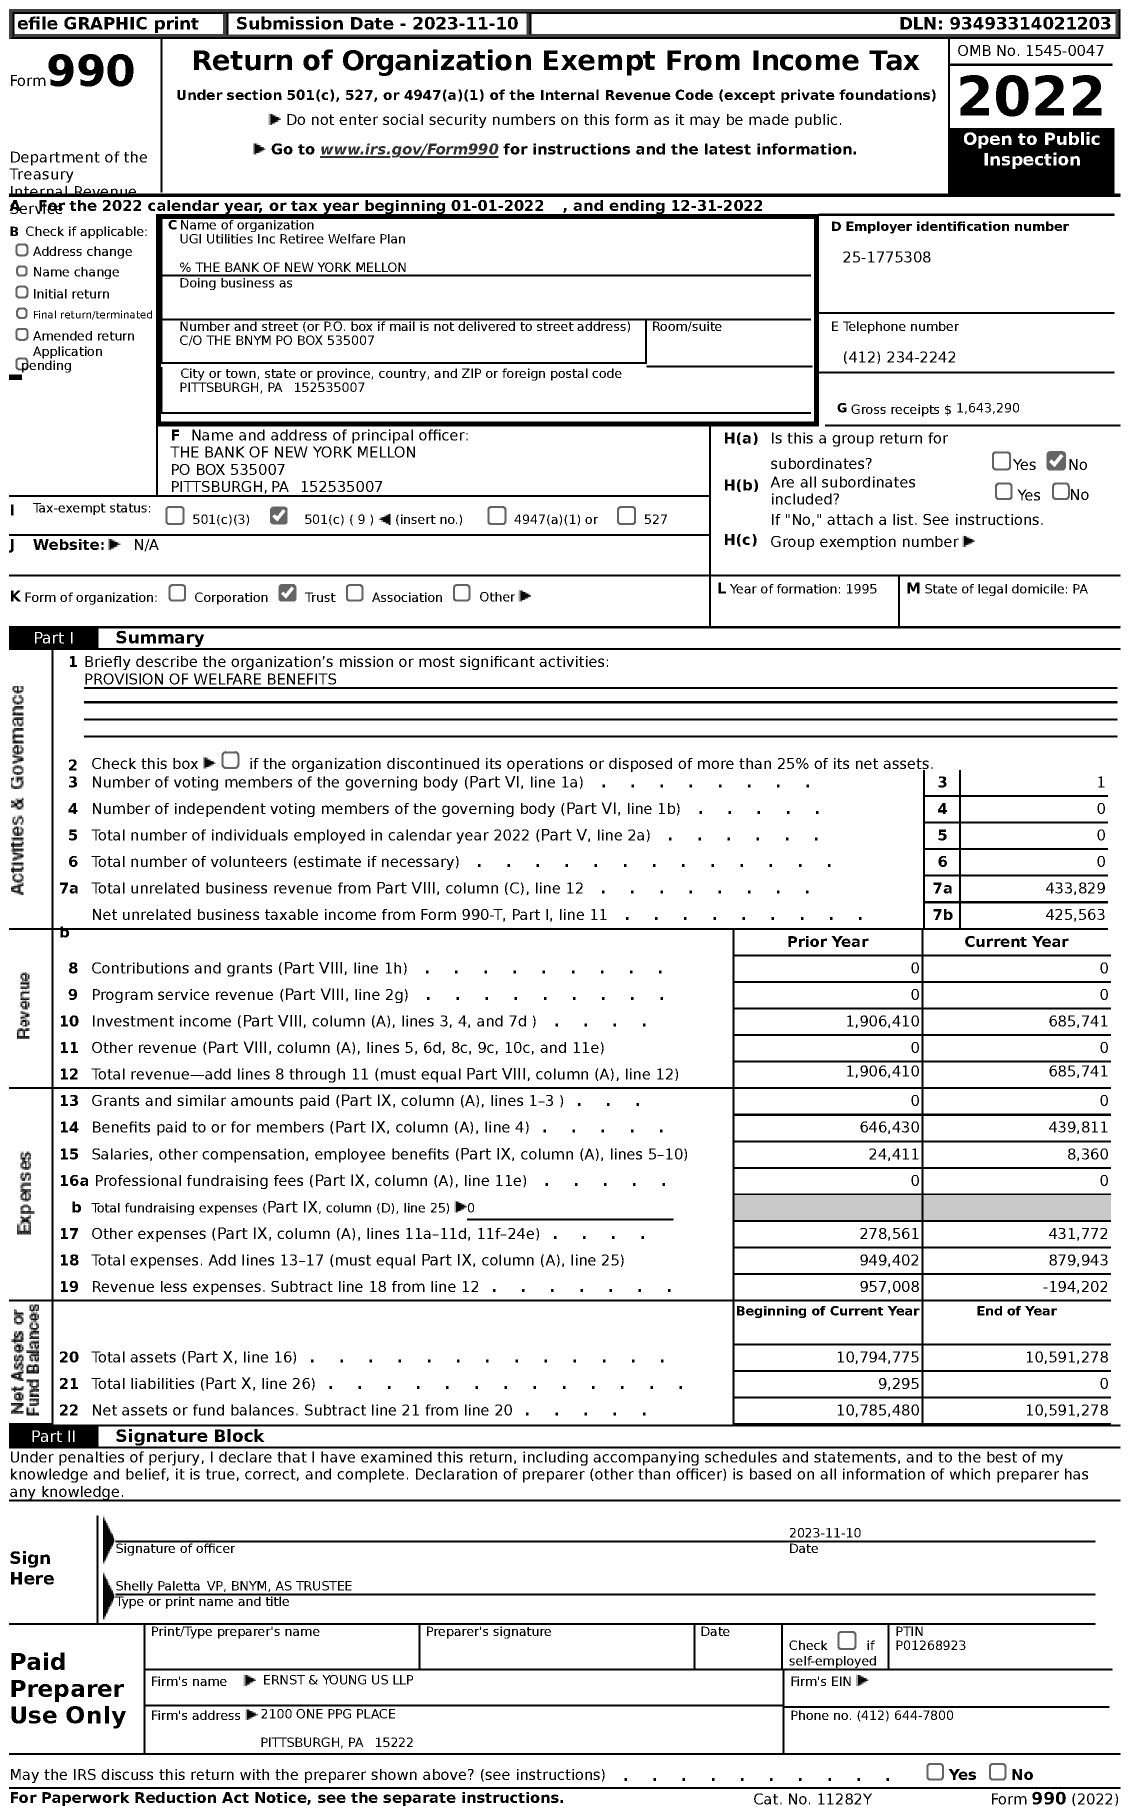 Image of first page of 2022 Form 990 for UGI Utilities Inc Retiree Welfare Plan